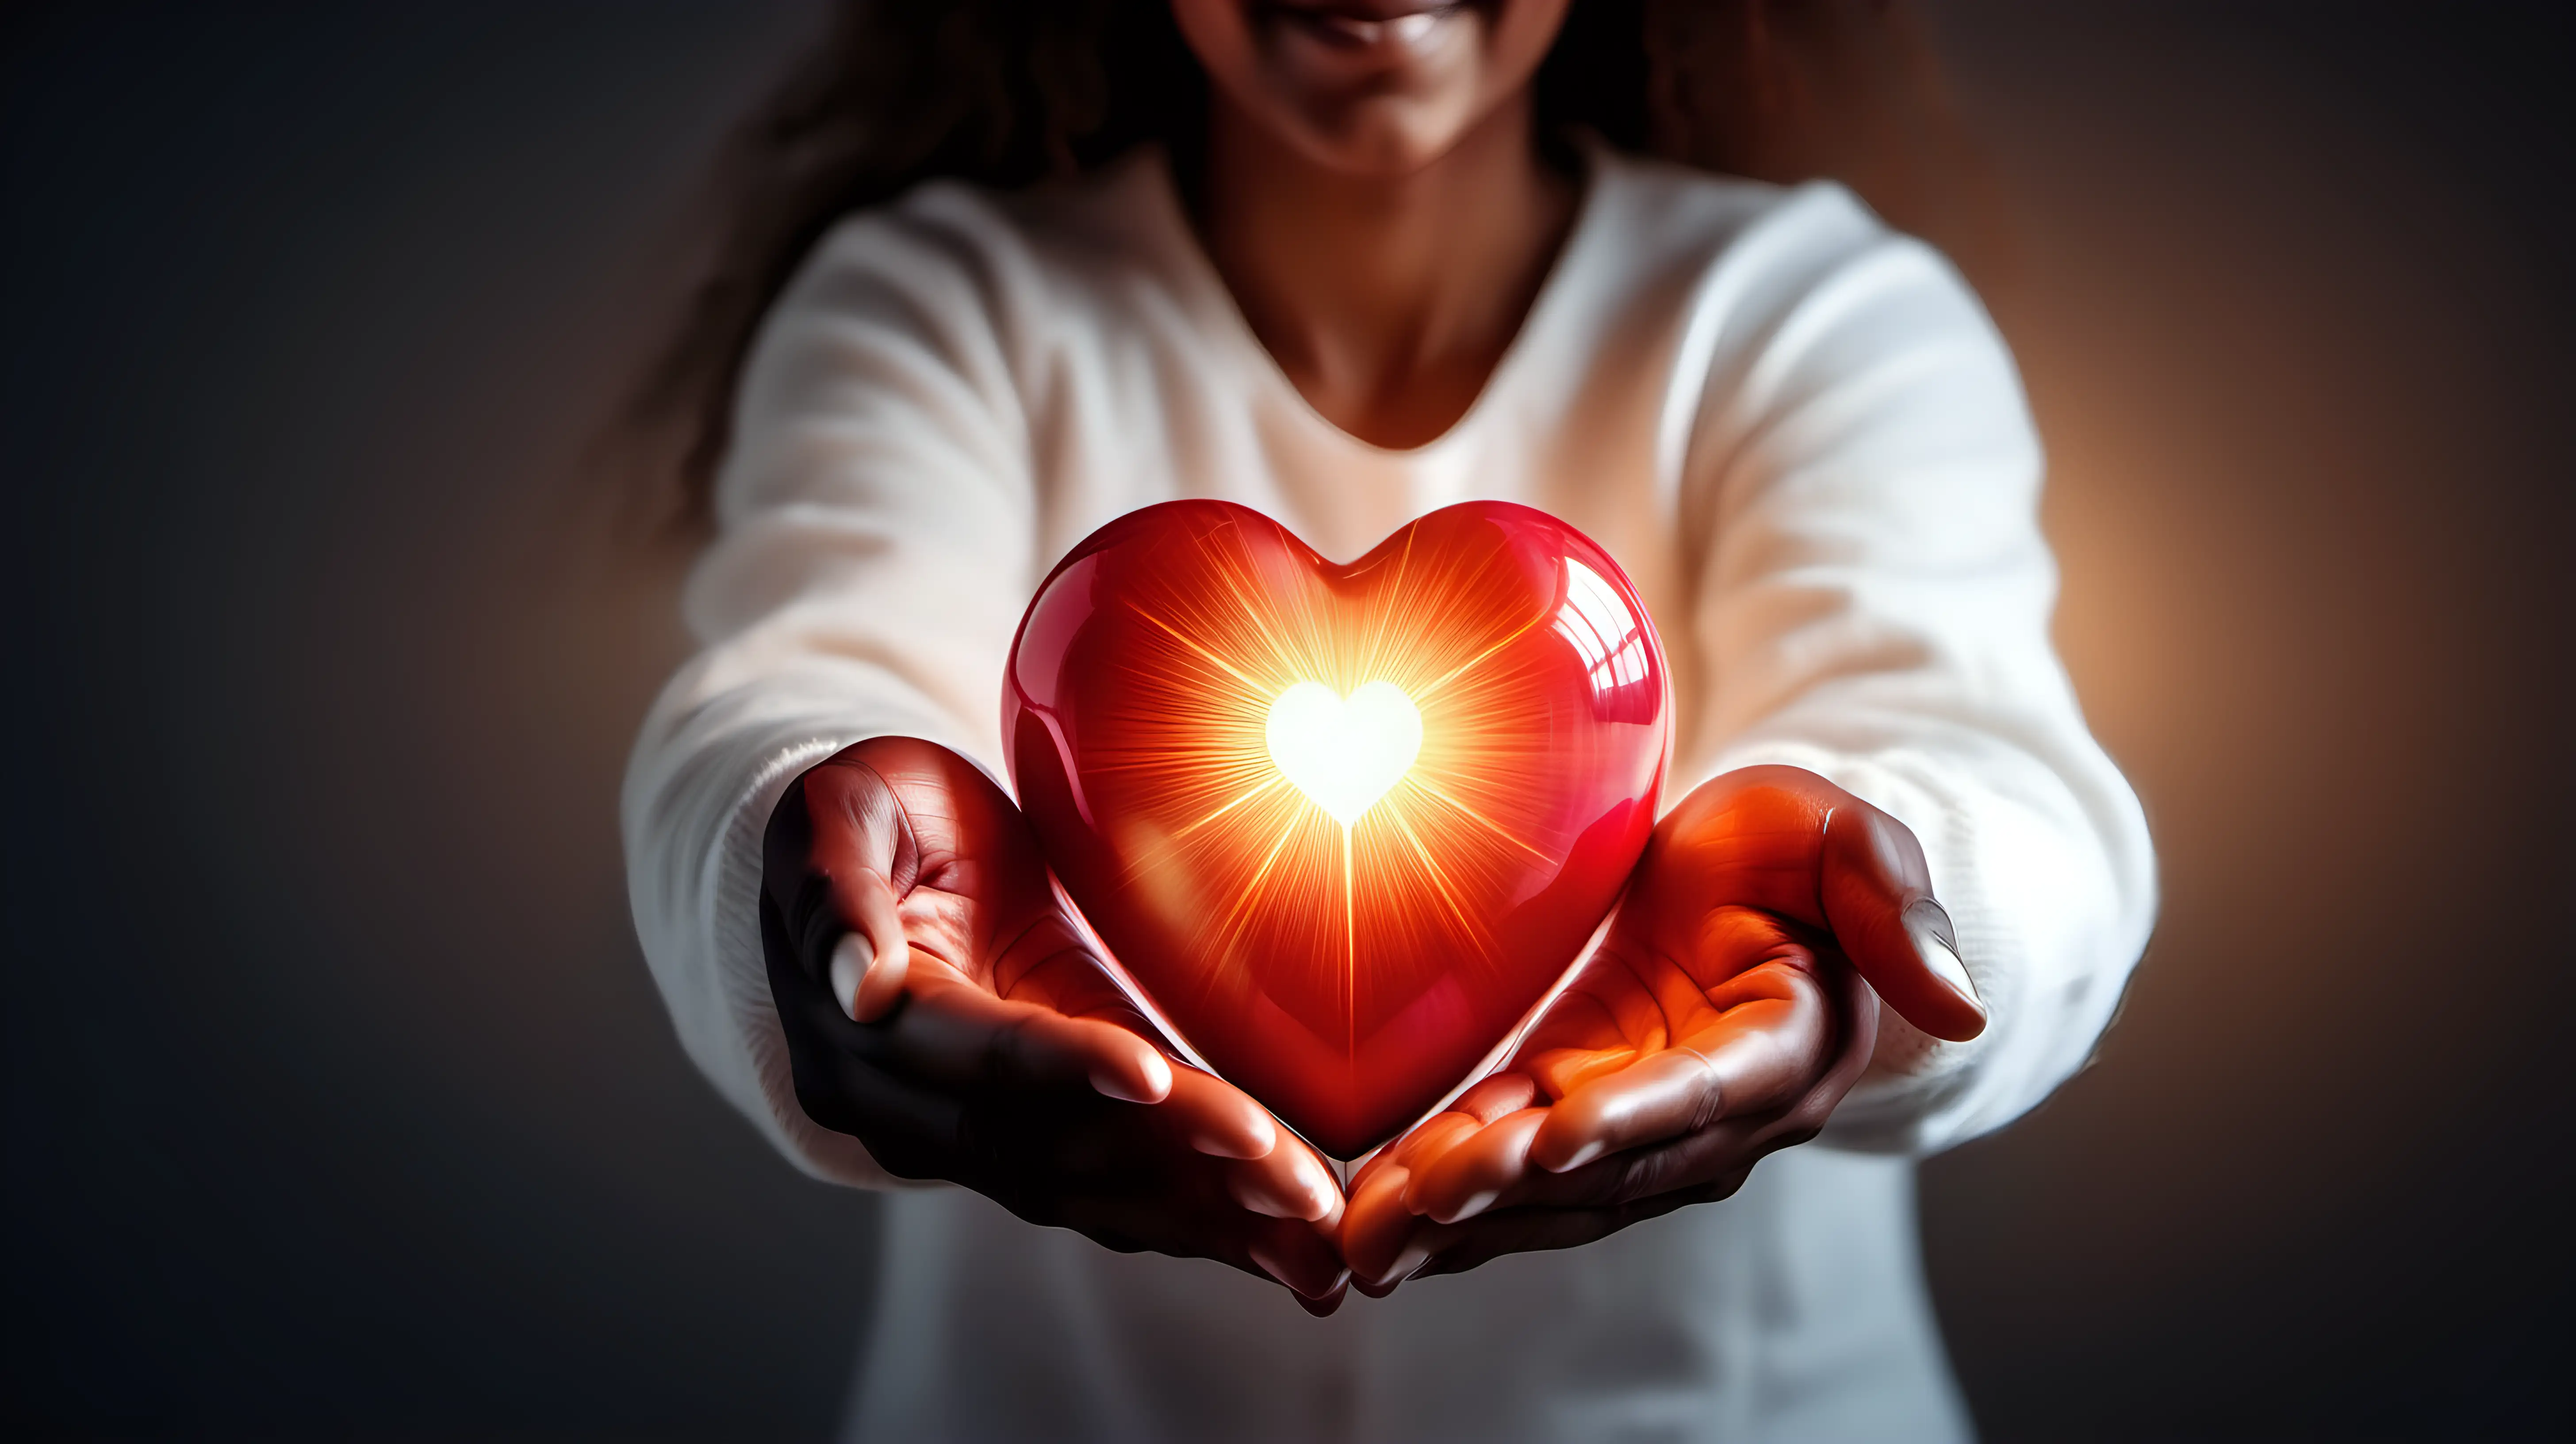 A caring individual holding a radiant human heart in their hands, the soft glow reflecting a commitment to heart health and well-being.